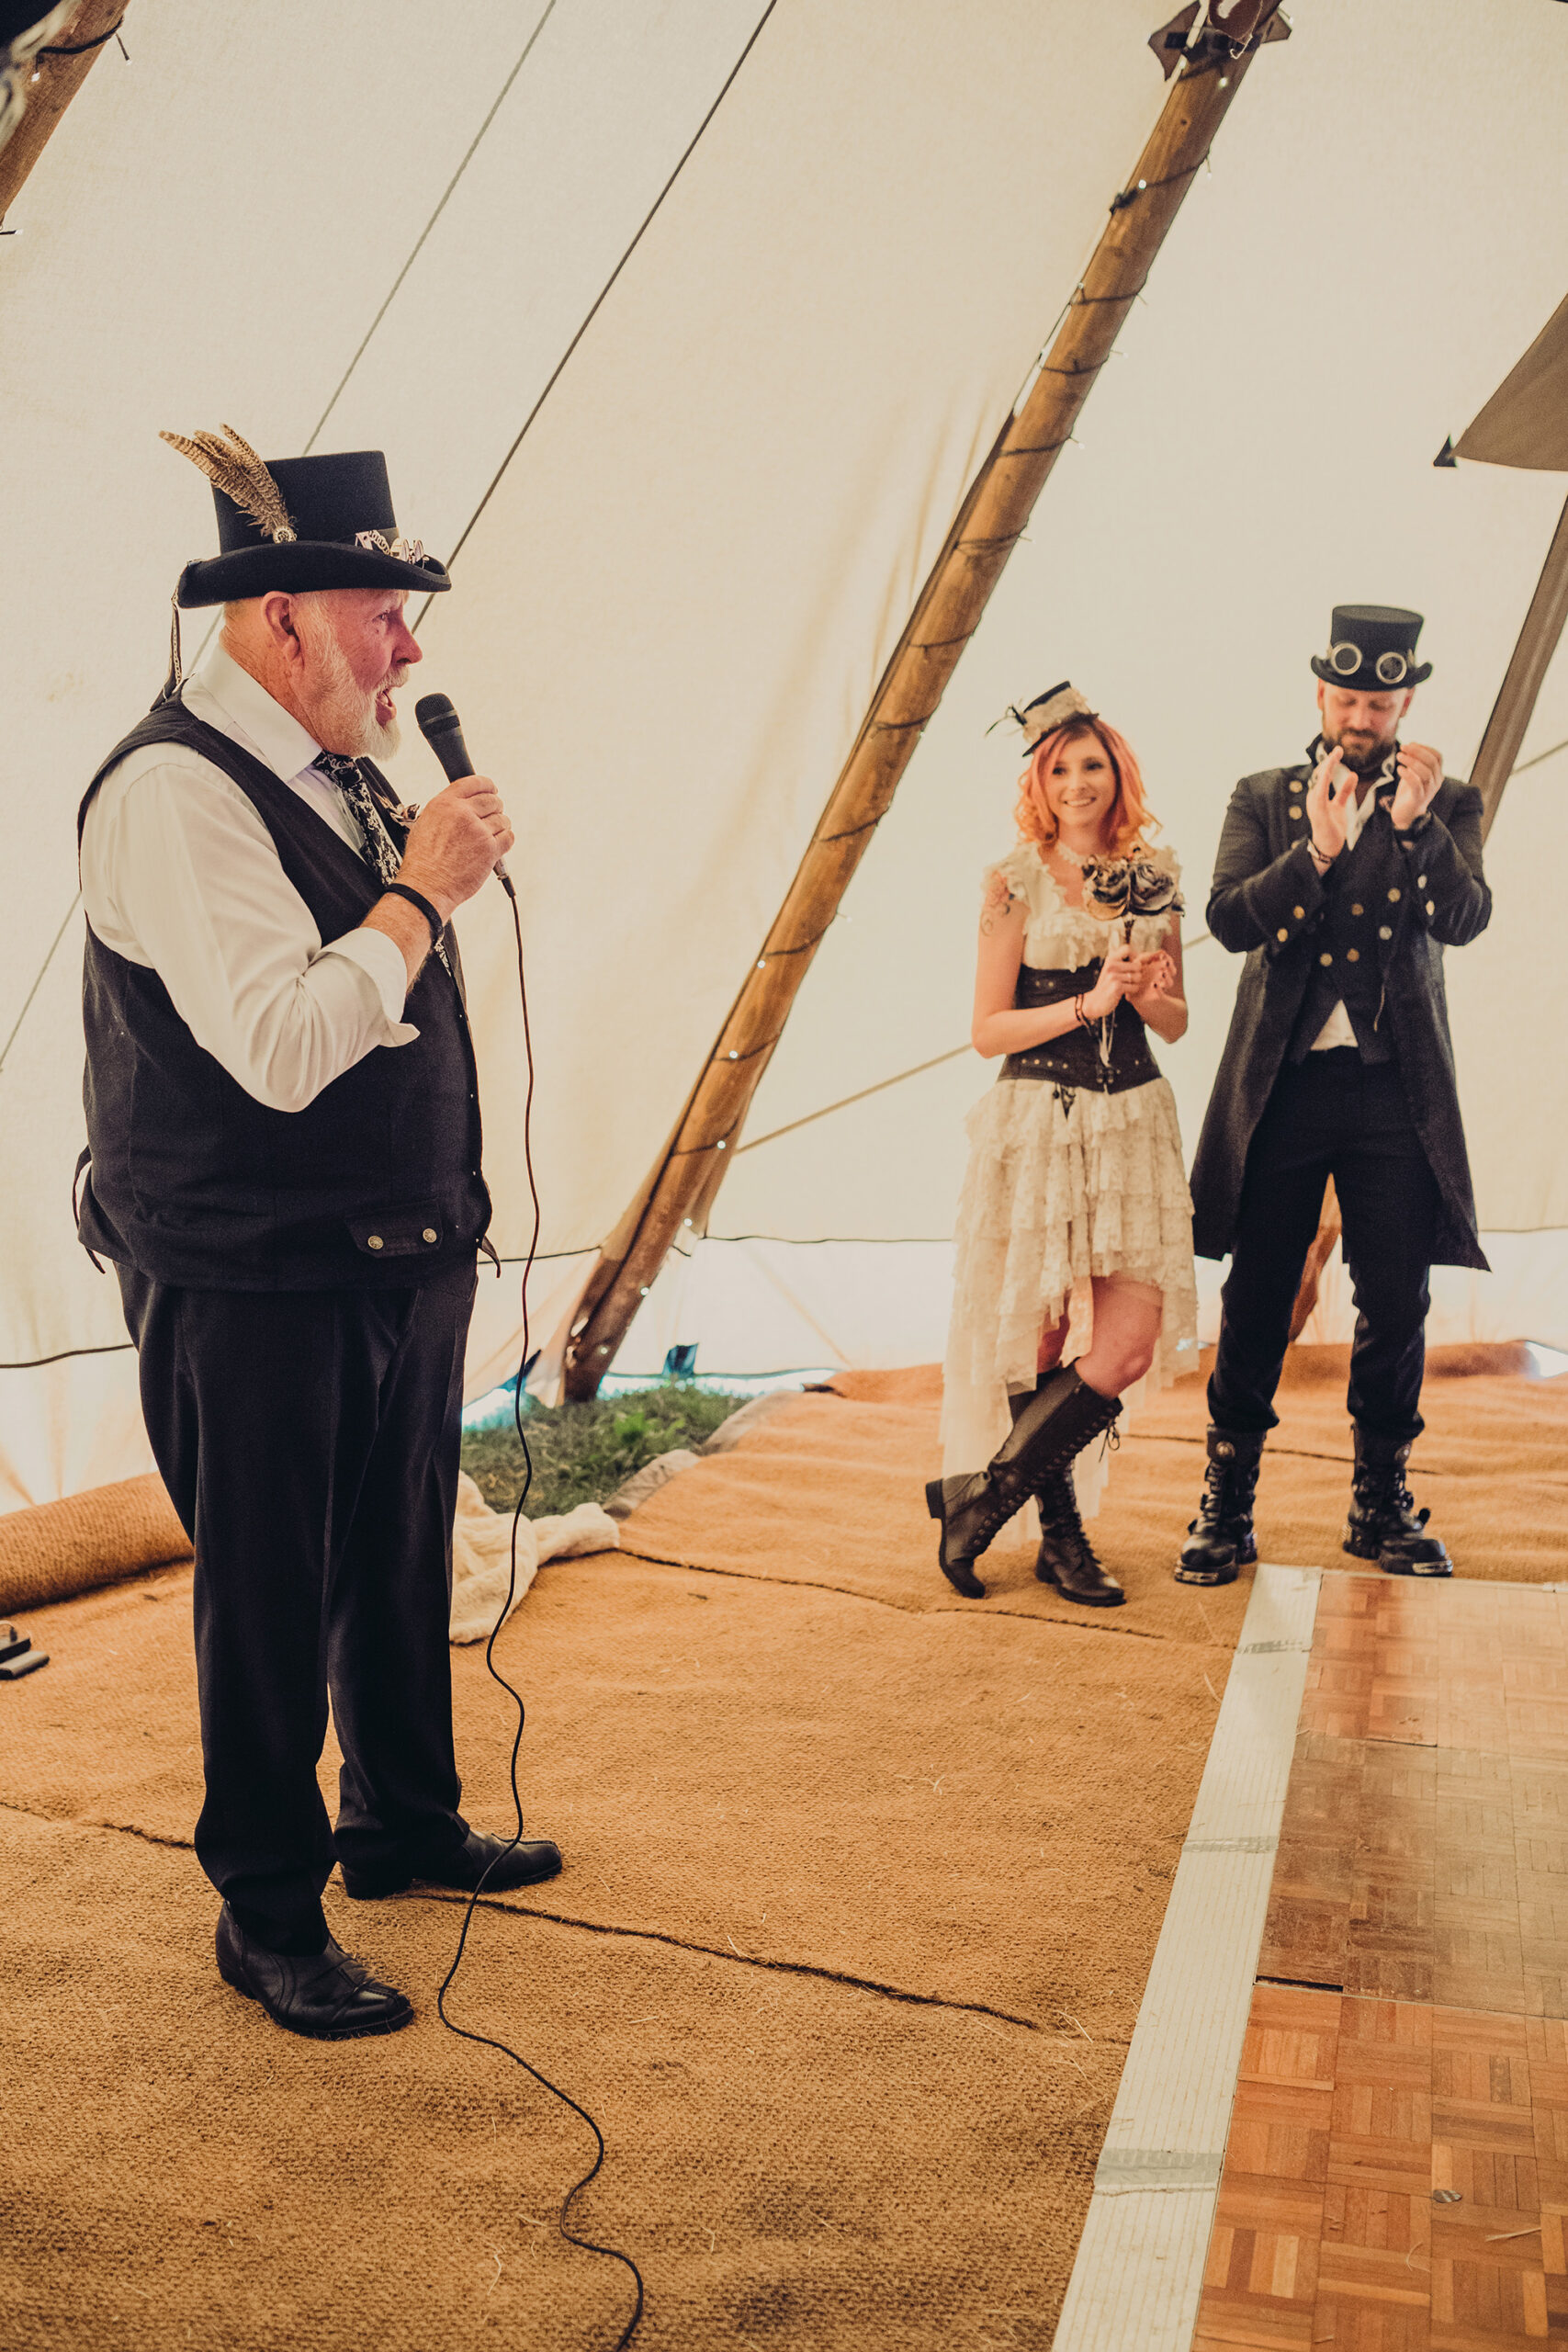 April Rien Steampunk Festival Wedding Chelsea Shoesmith Photography SBS 017 scaled